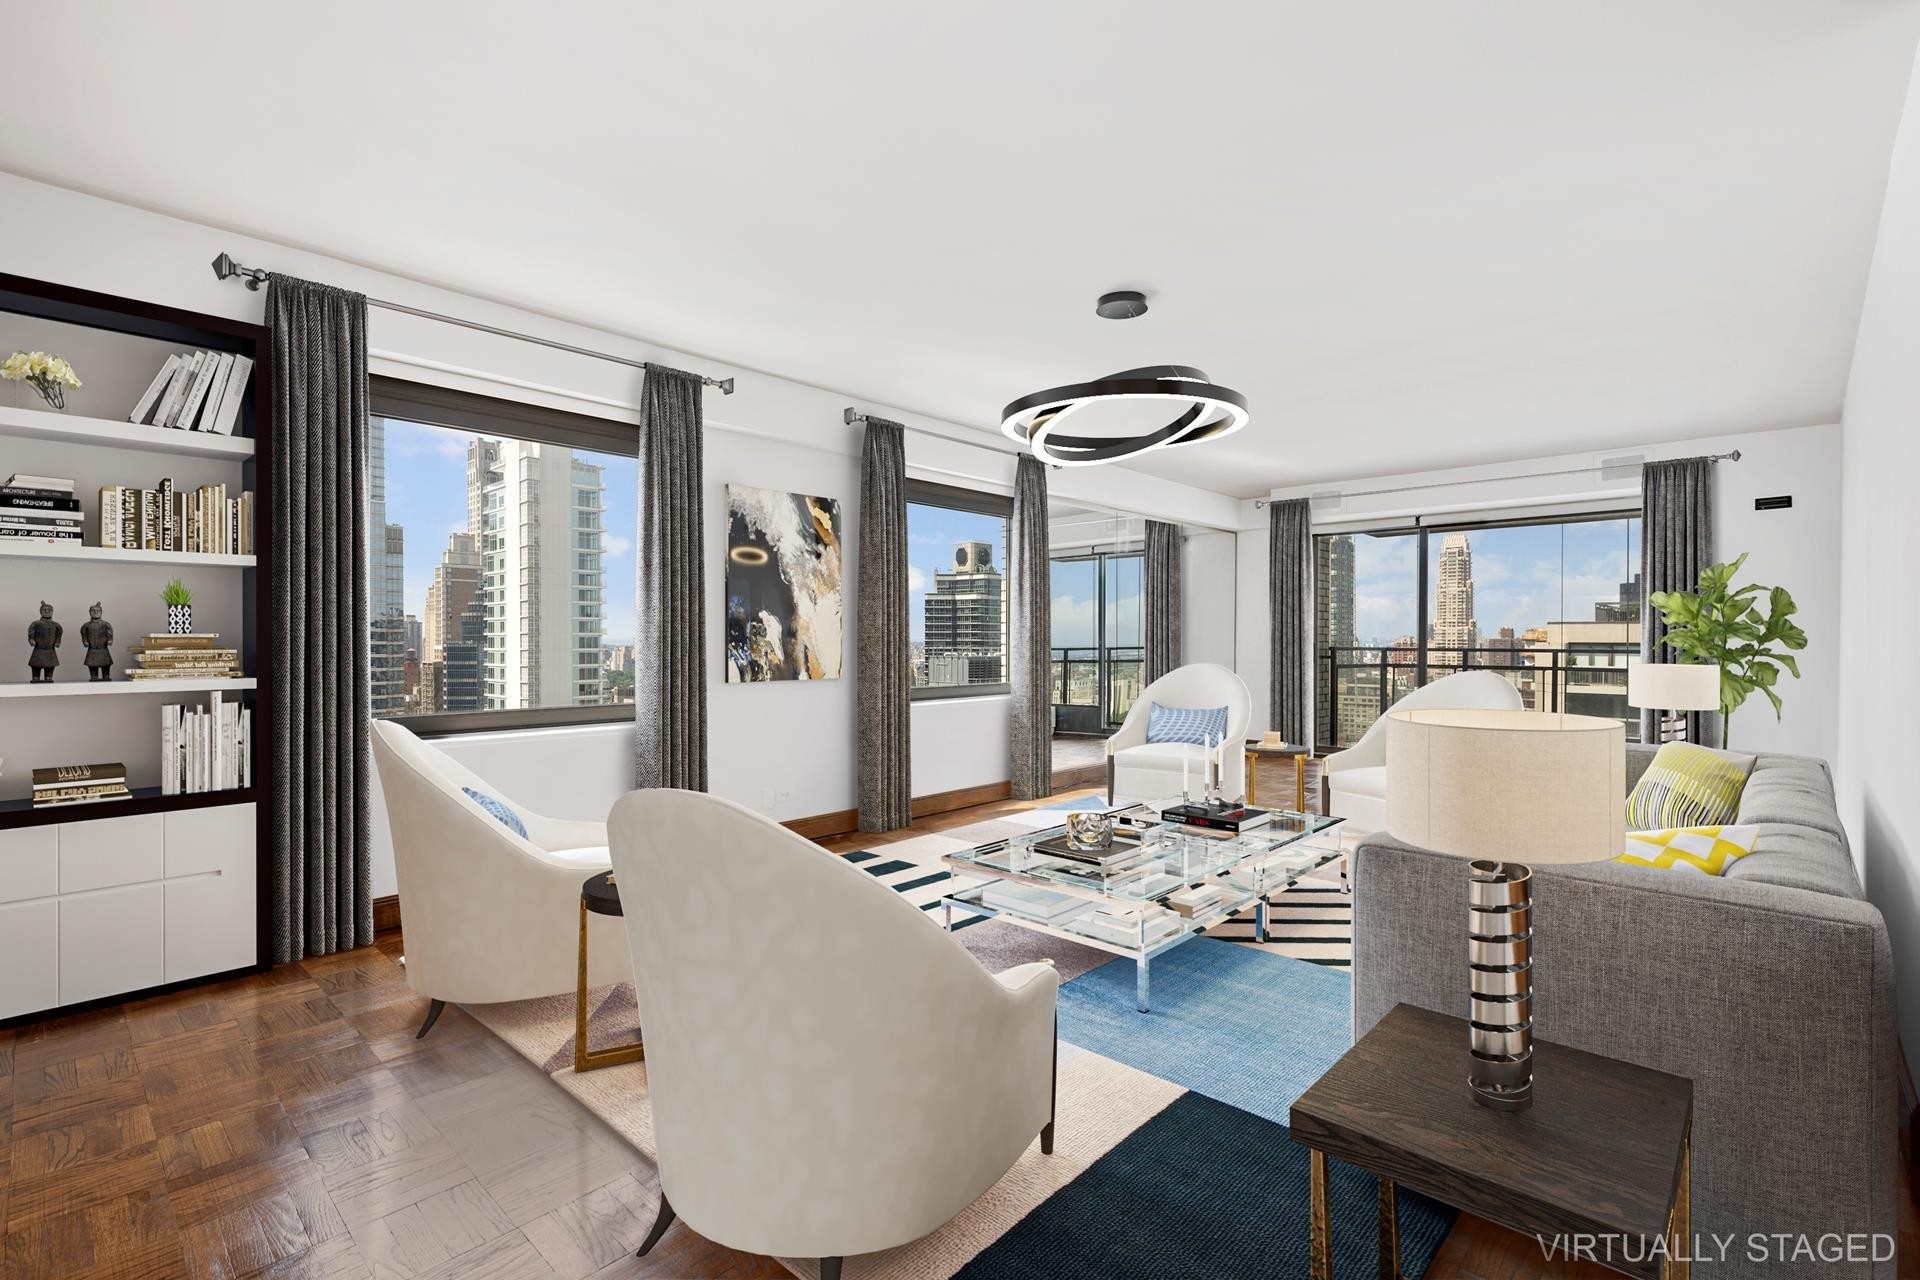 Co-op Properties for Sale at The Excelsior, 303 E 57TH ST, 35E Midtown East, New York, New York 10022